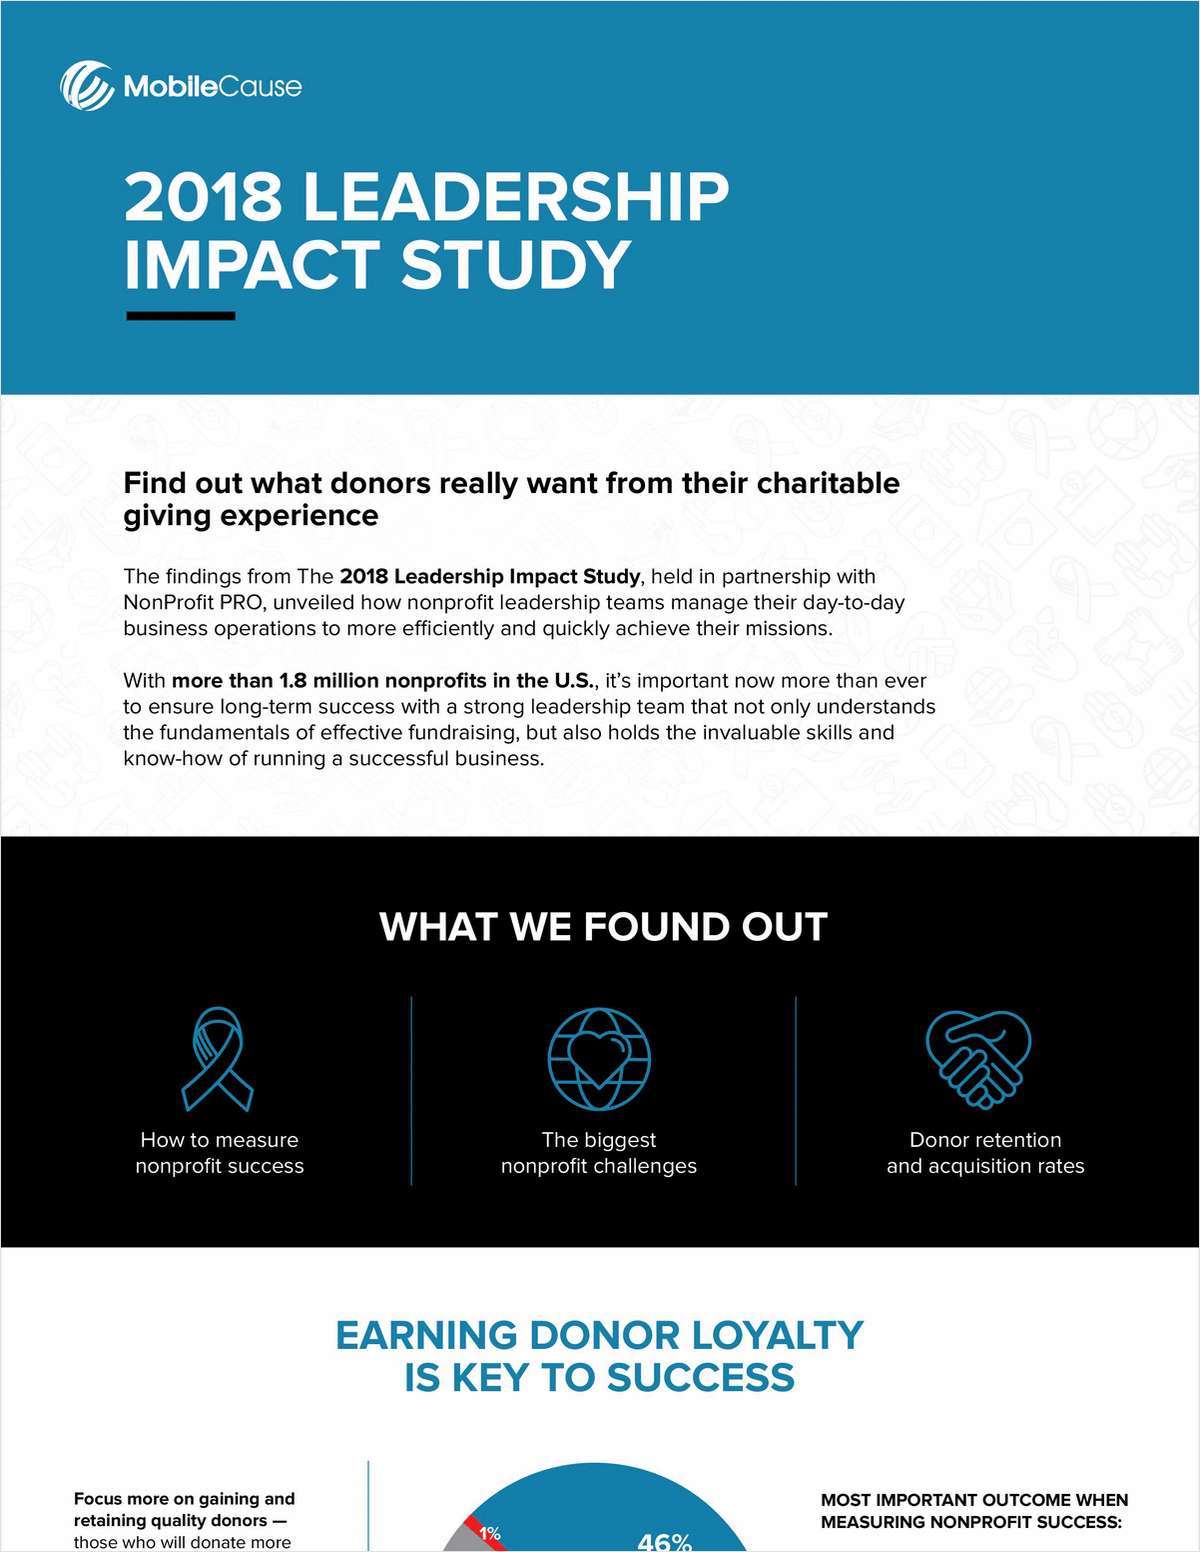 5 Key Takeaways From the 2018 Leadership Impact Study